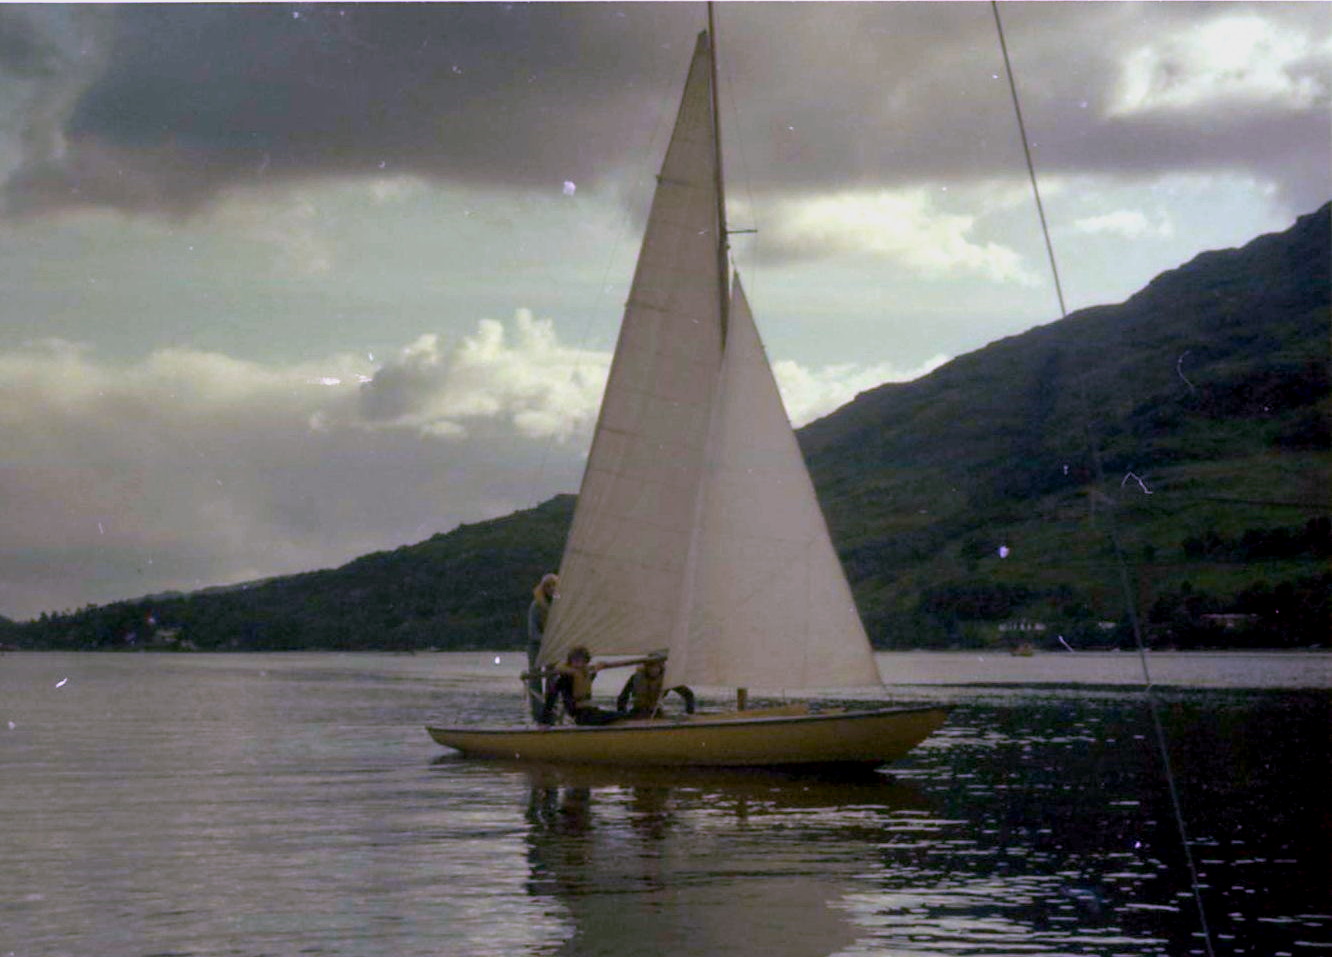 Sailing in Loch Goil in Argylleshire in the Southern Highlands of Scotland